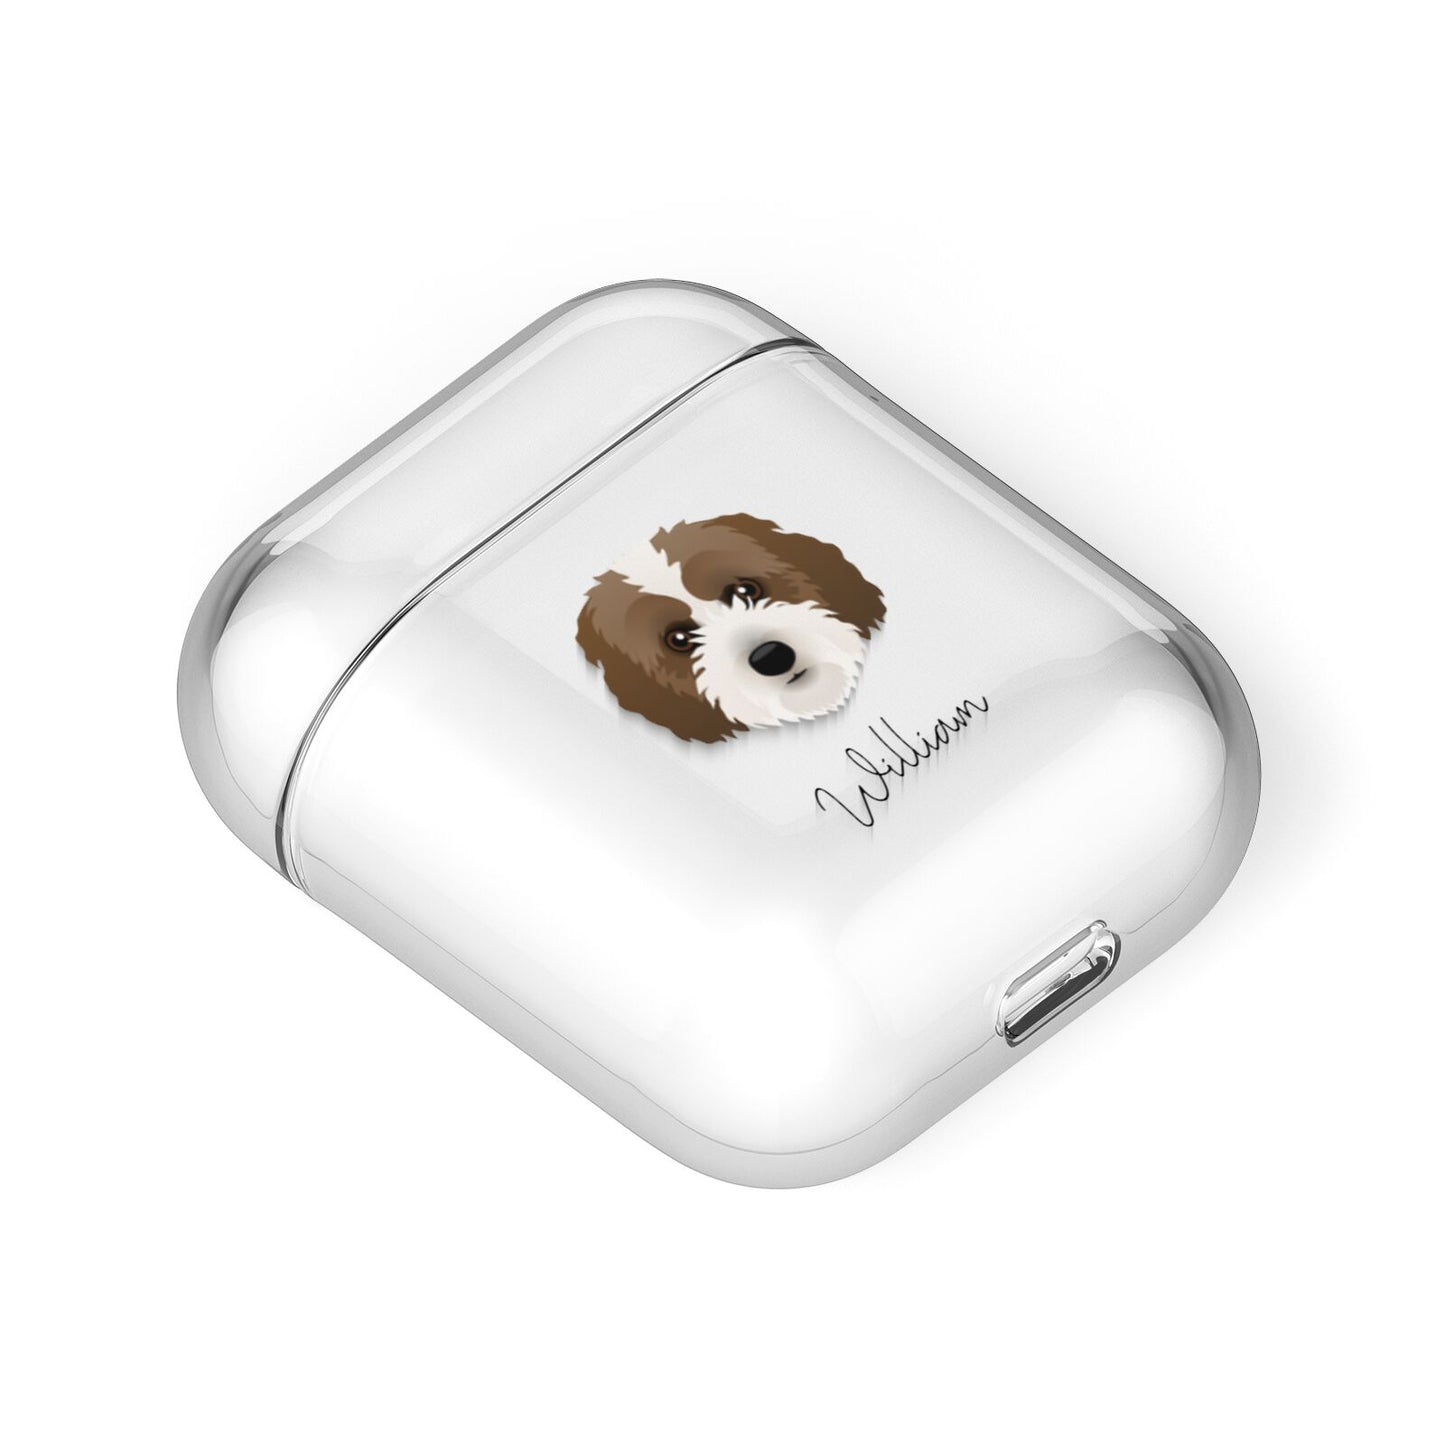 Cockachon Personalised AirPods Case Laid Flat